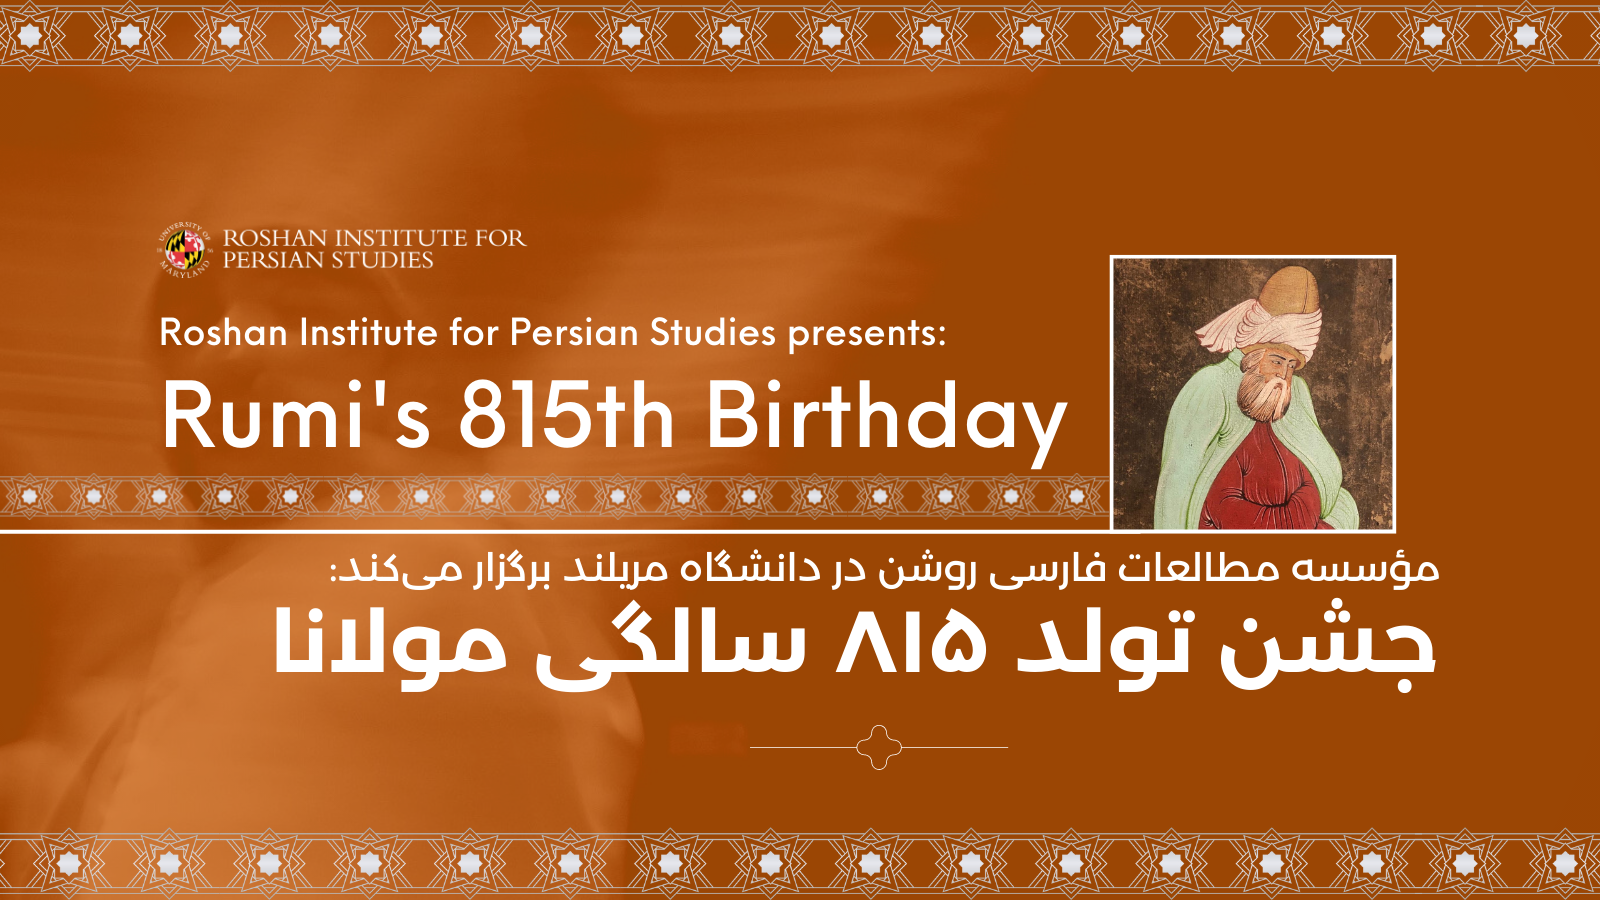 A banner for Rumi's 815th Birthday Celebration in 16:9